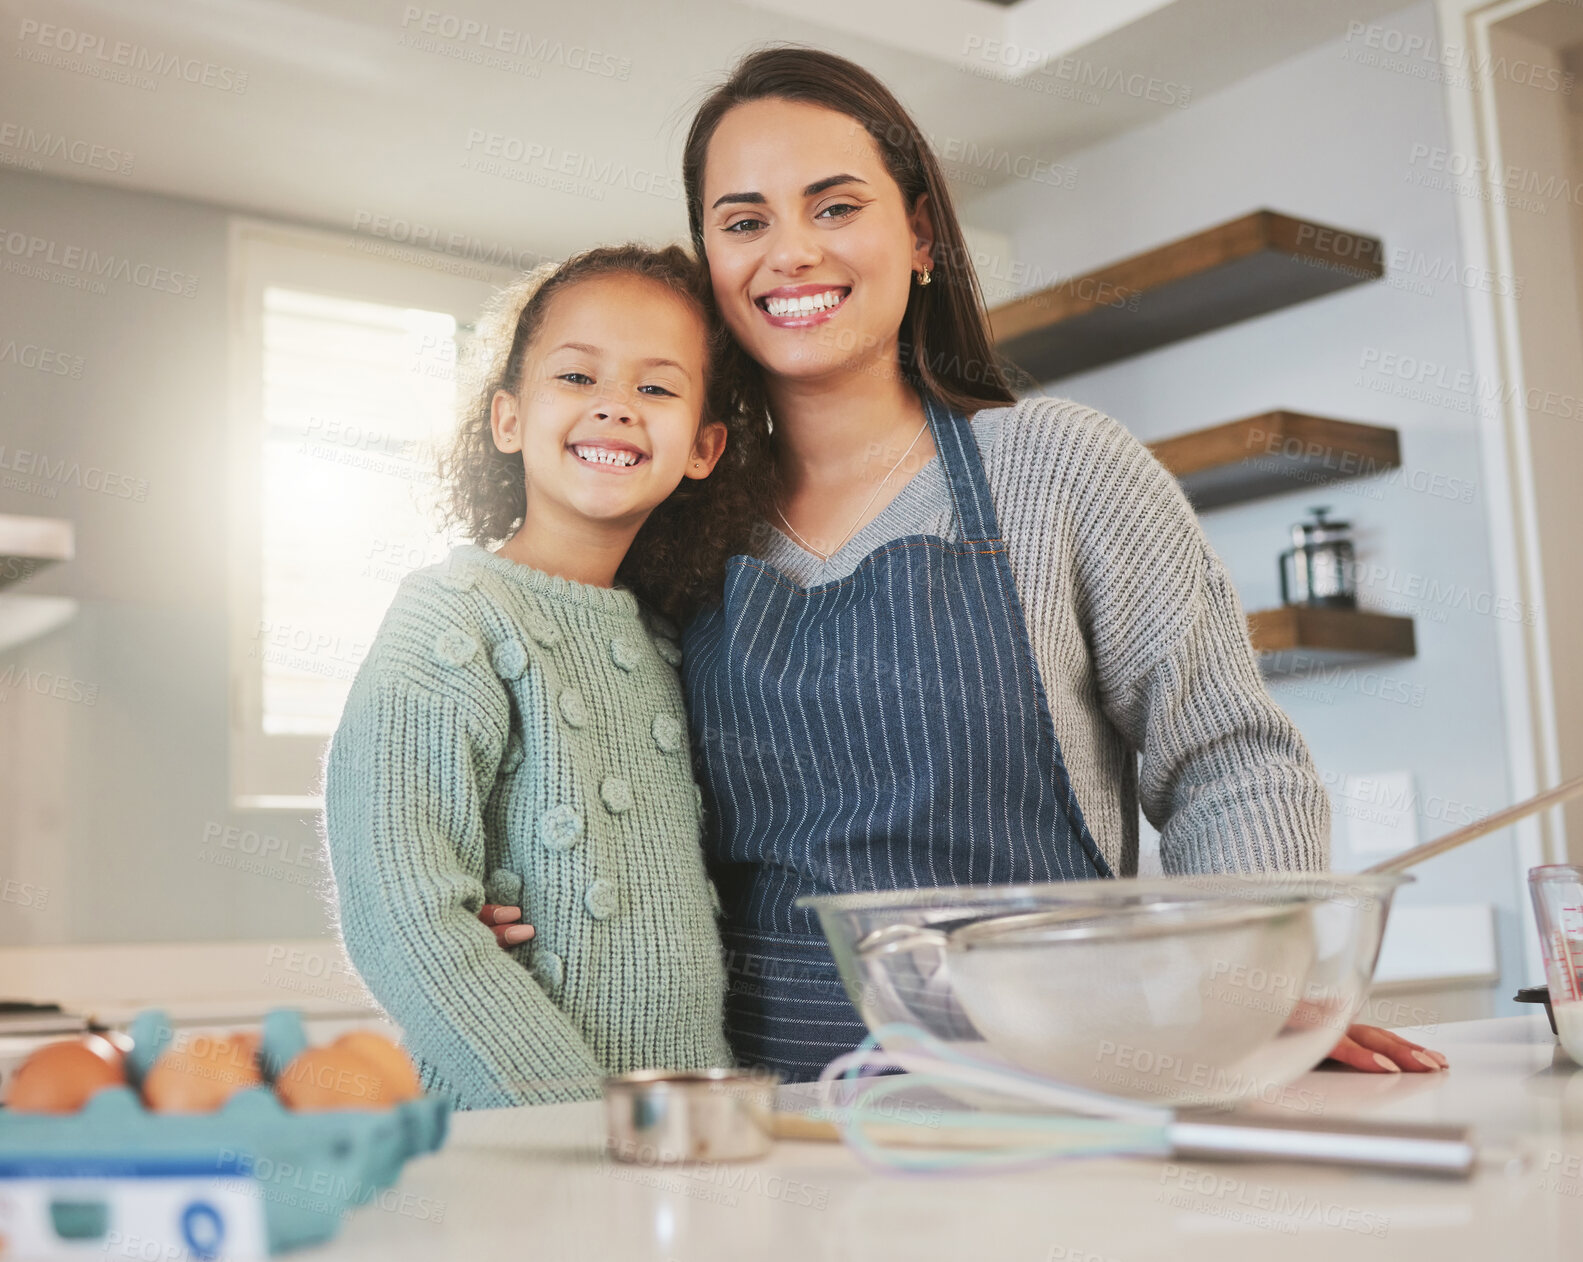 Buy stock photo Shot of a mom baking with her daughter in their kitchen at home